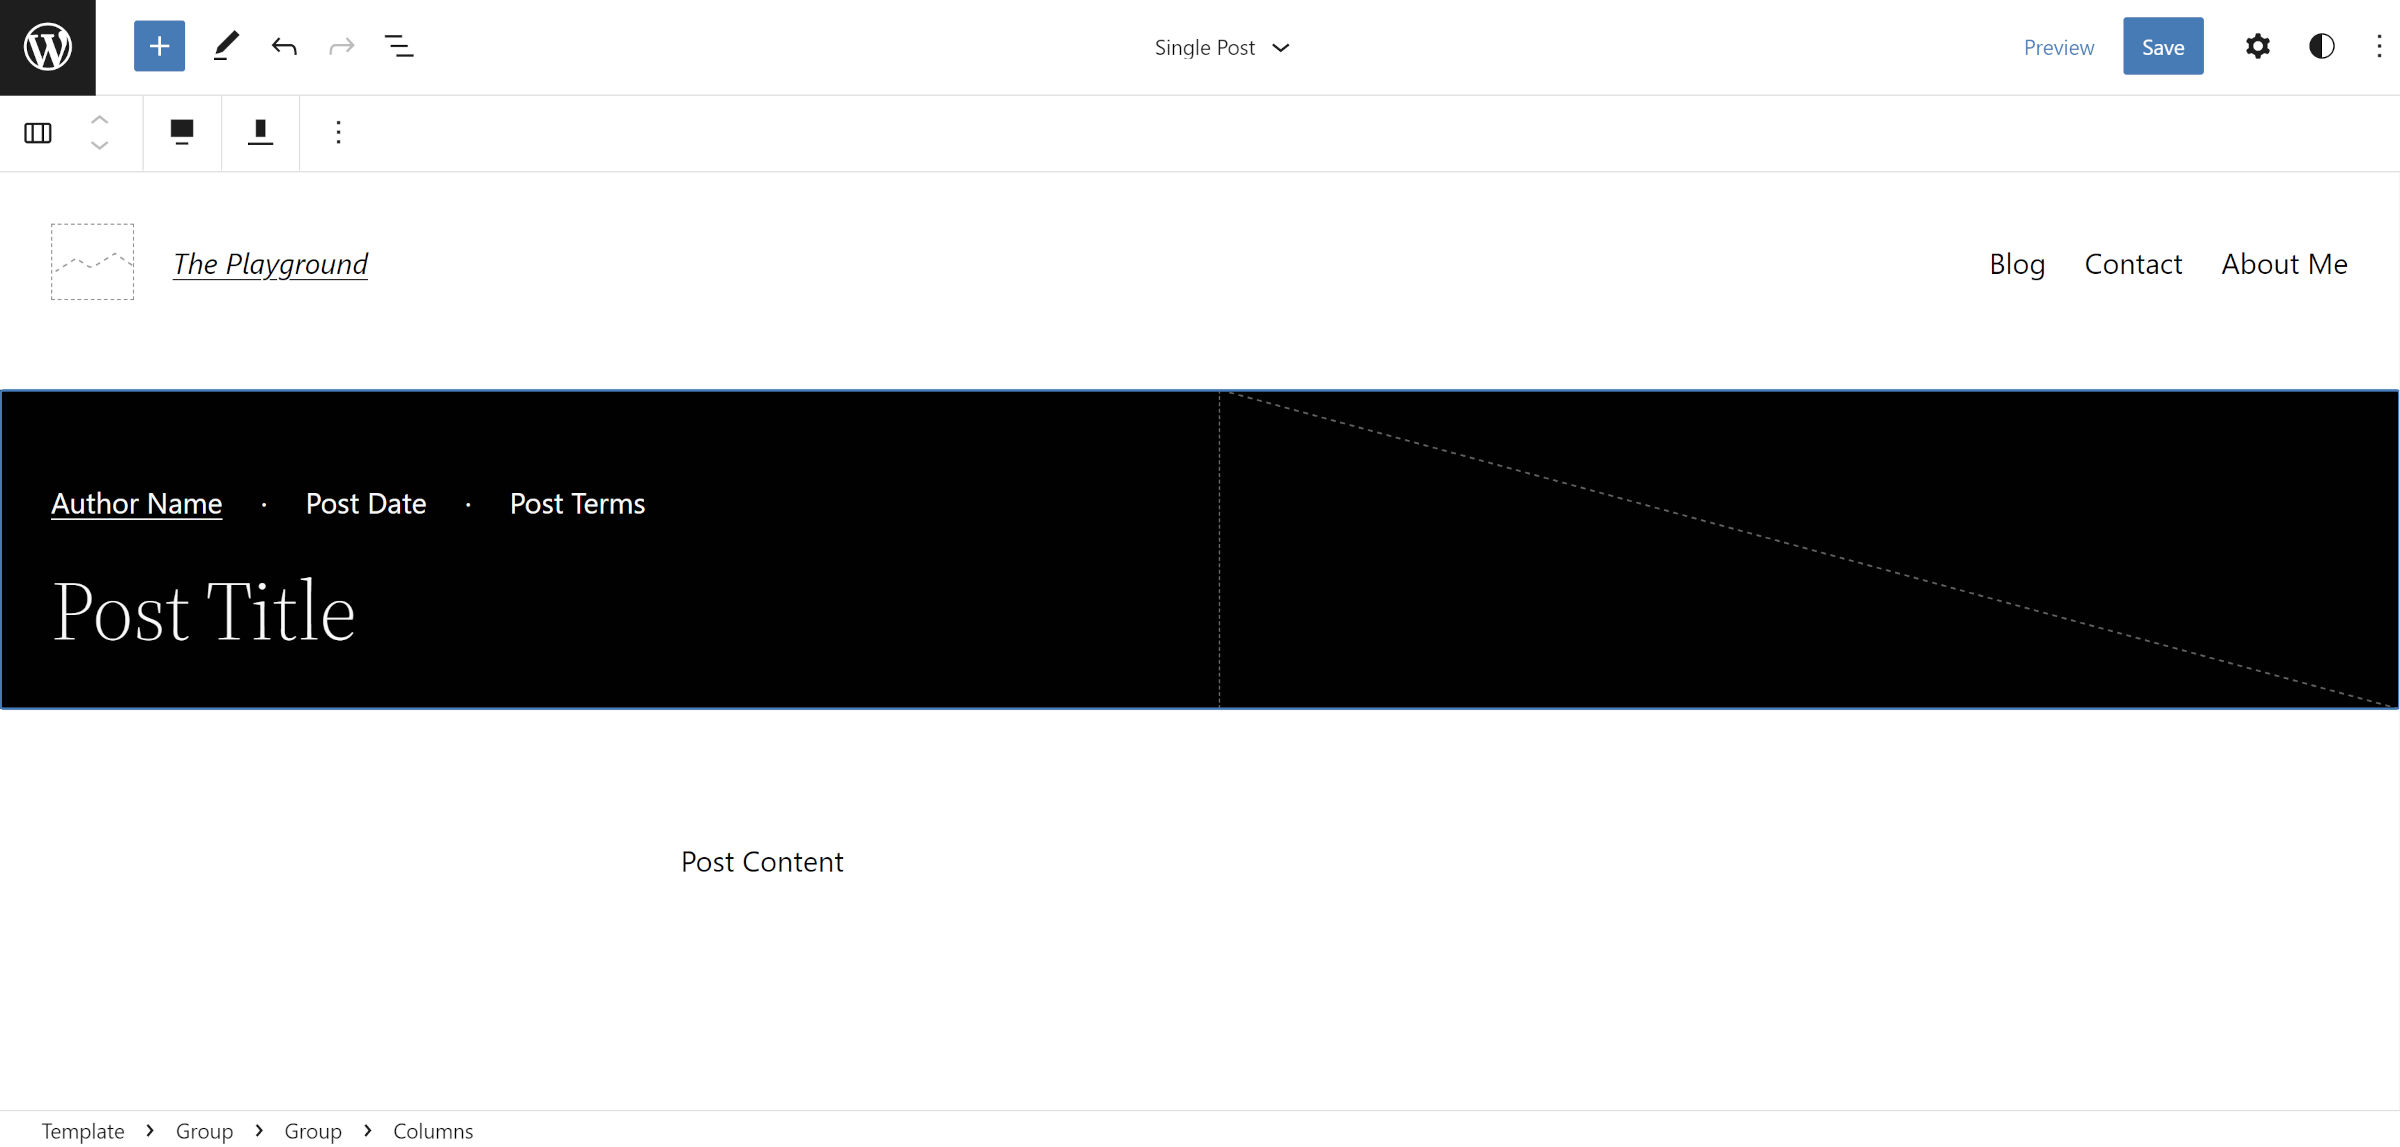 WordPress site editor showing the single post view with a split-screen header.